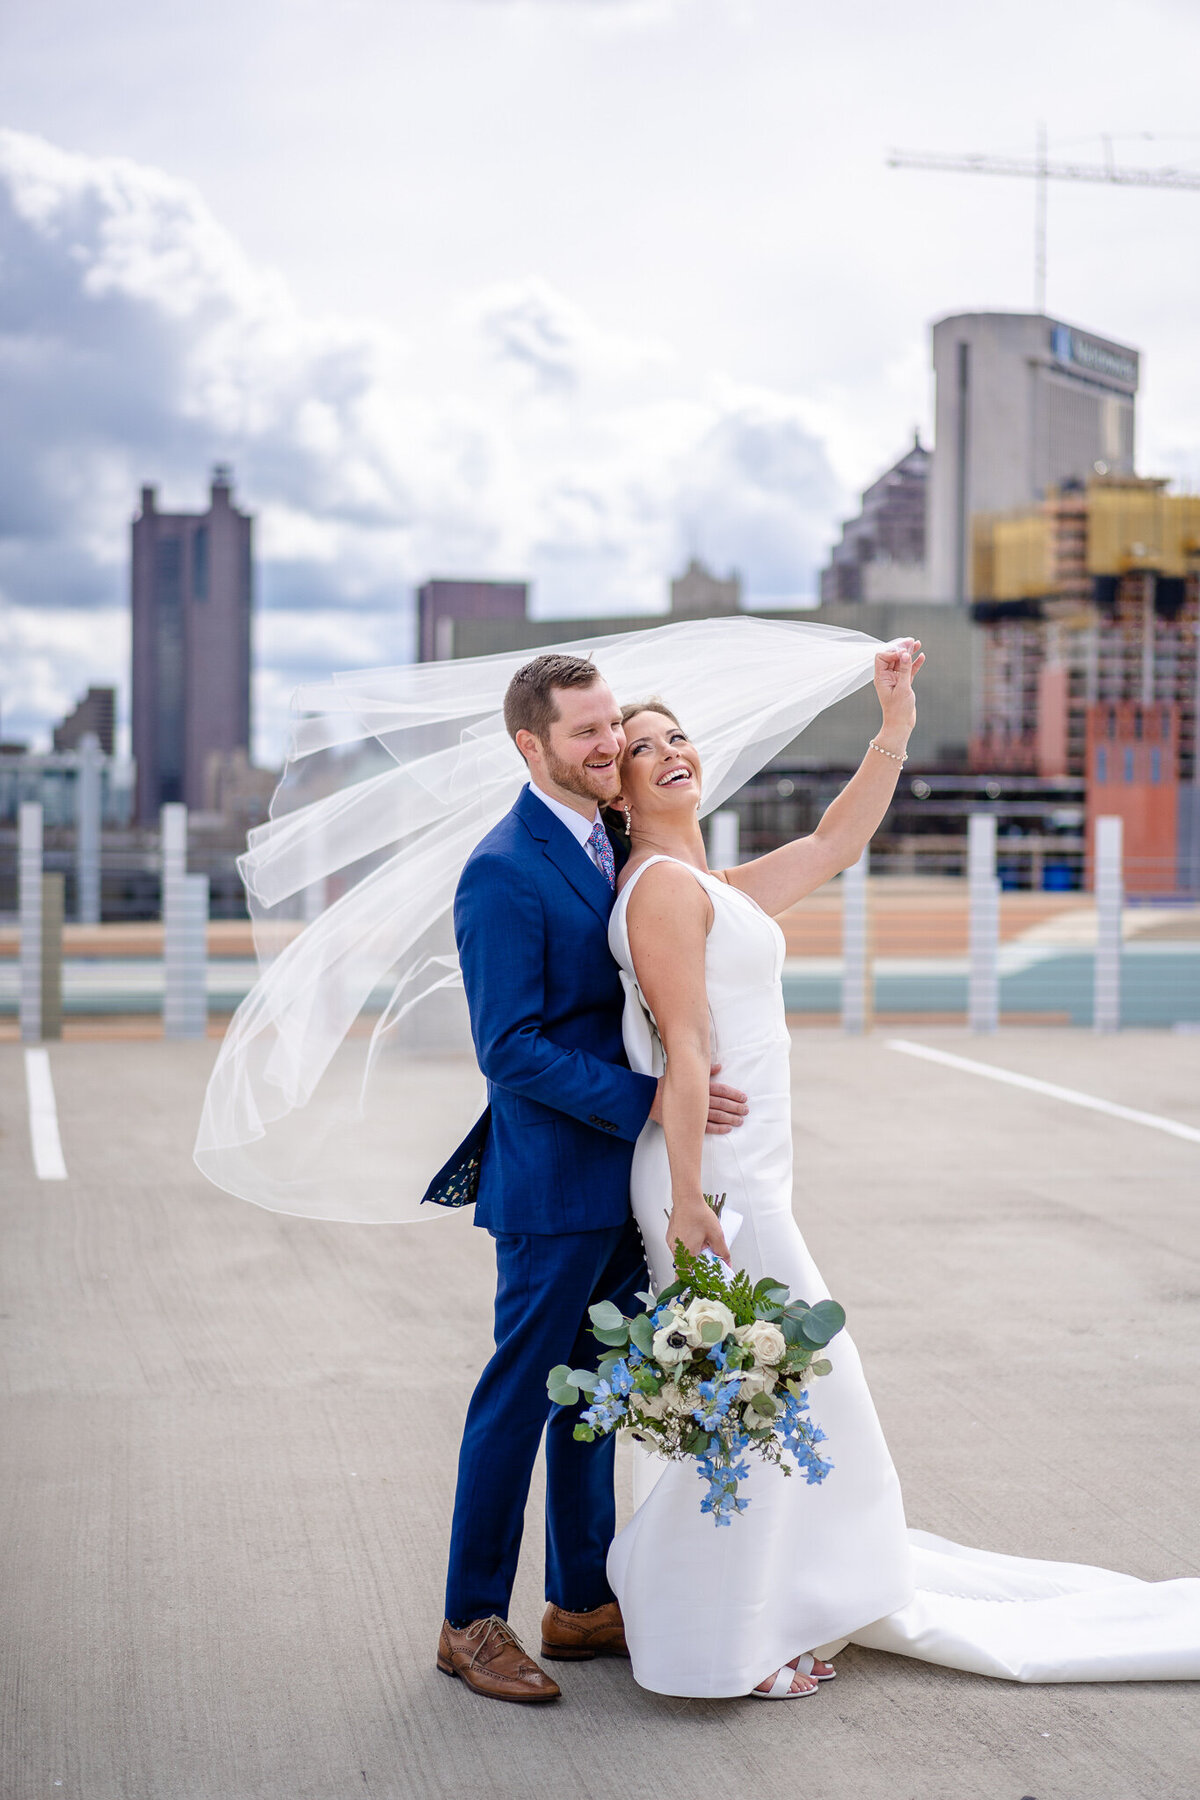 Bride, Vicky, swings her veil in the wind with her groom, David Hitch, on top of a parking garage with the Columbus skyline in the background.